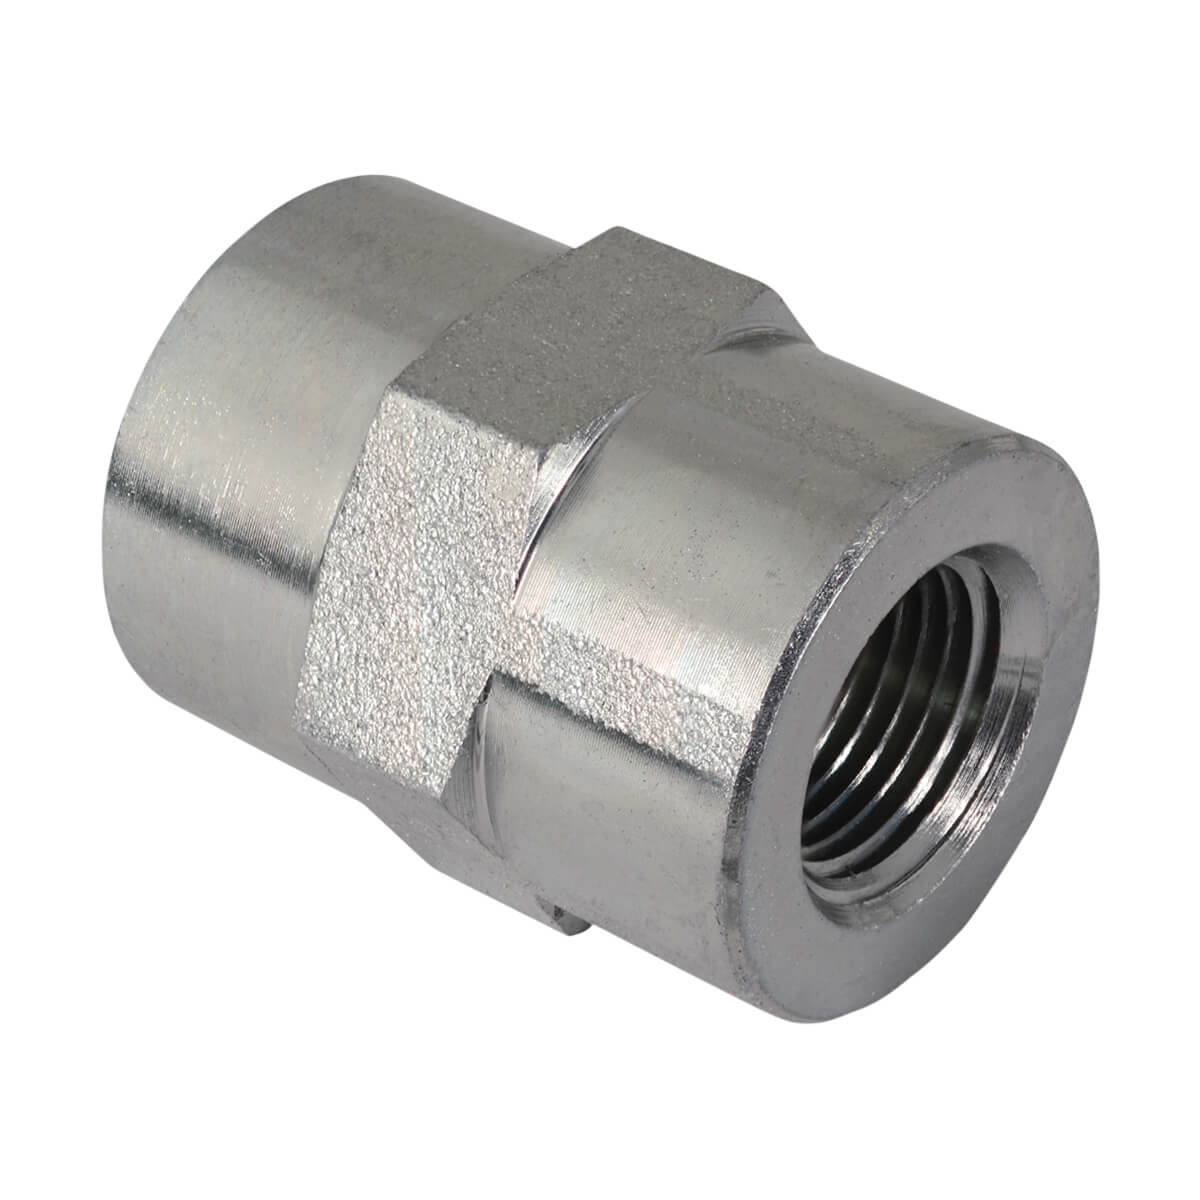 Female Pipe Thread Hydraulic Adapter - 1/4-in FPT x 1/4-in